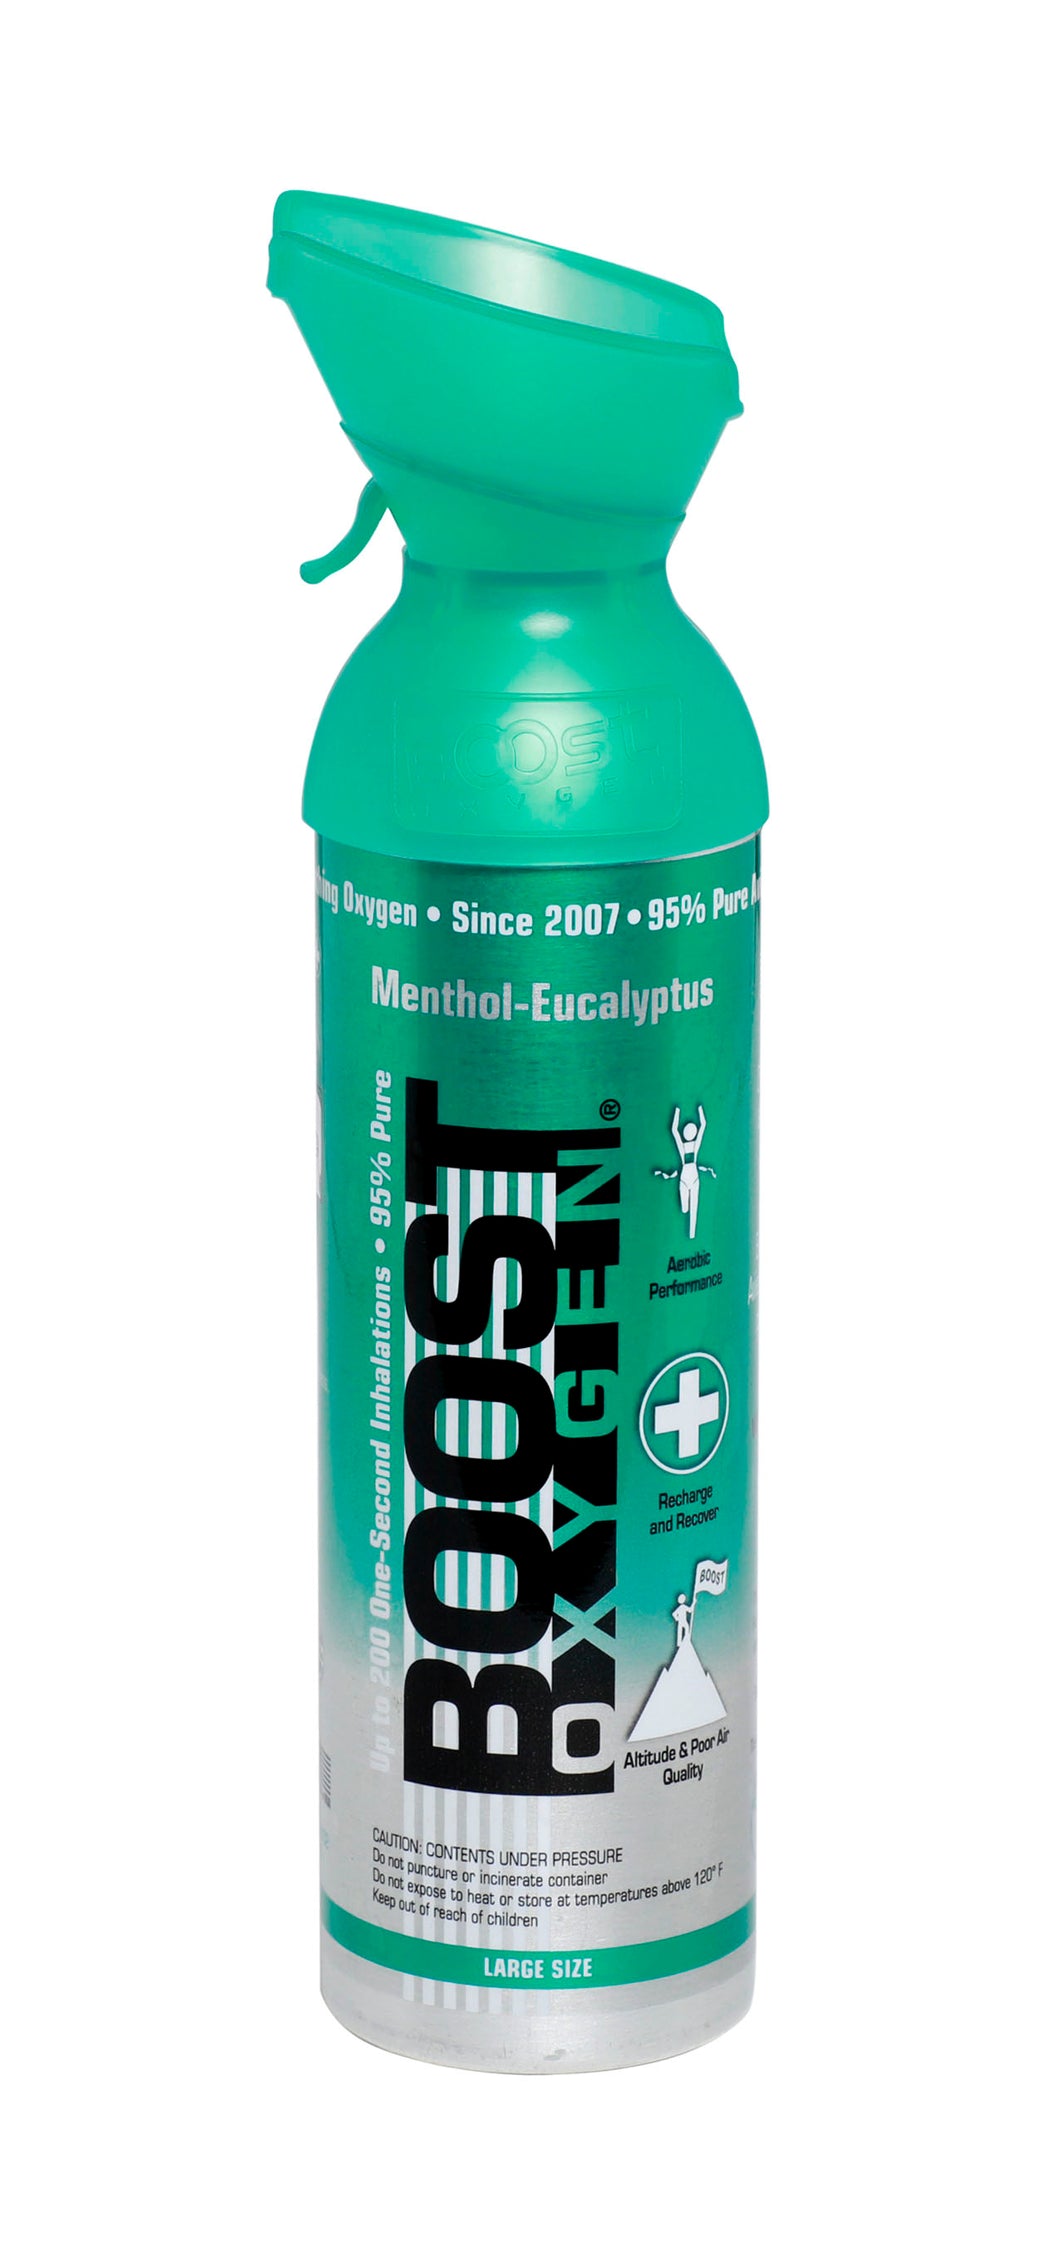 Menthol-Eucalyptus 95% Pure Supplemental Oxygen in a Portable Canister